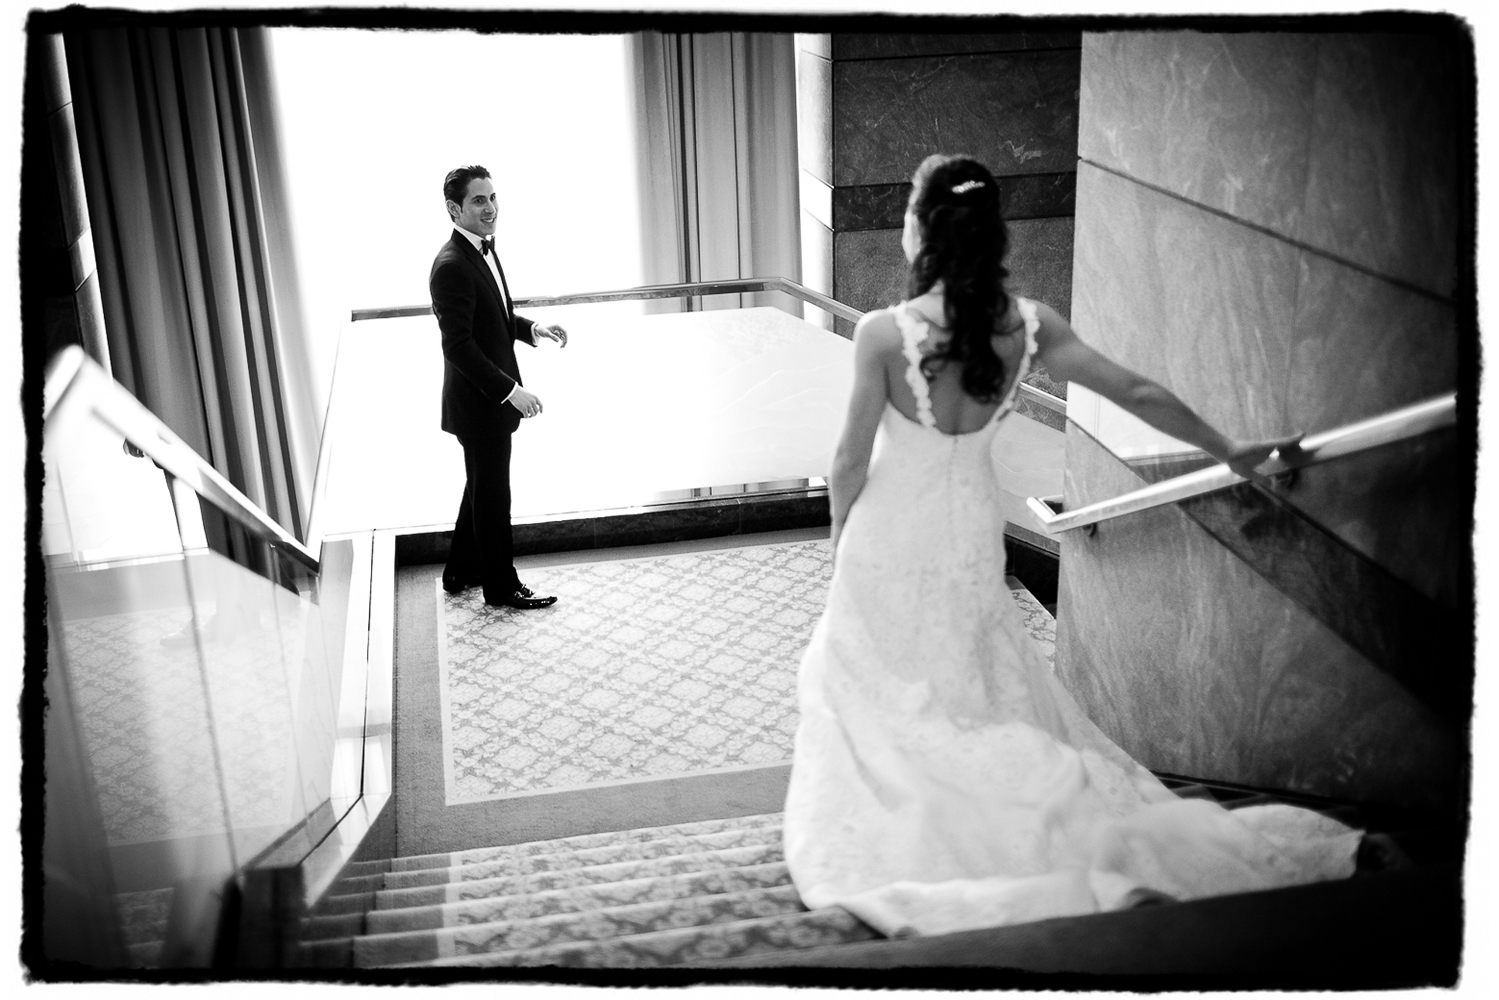 Aaron beholds his bride coming down the stairs at The Ritz-Carlton Battery Park.